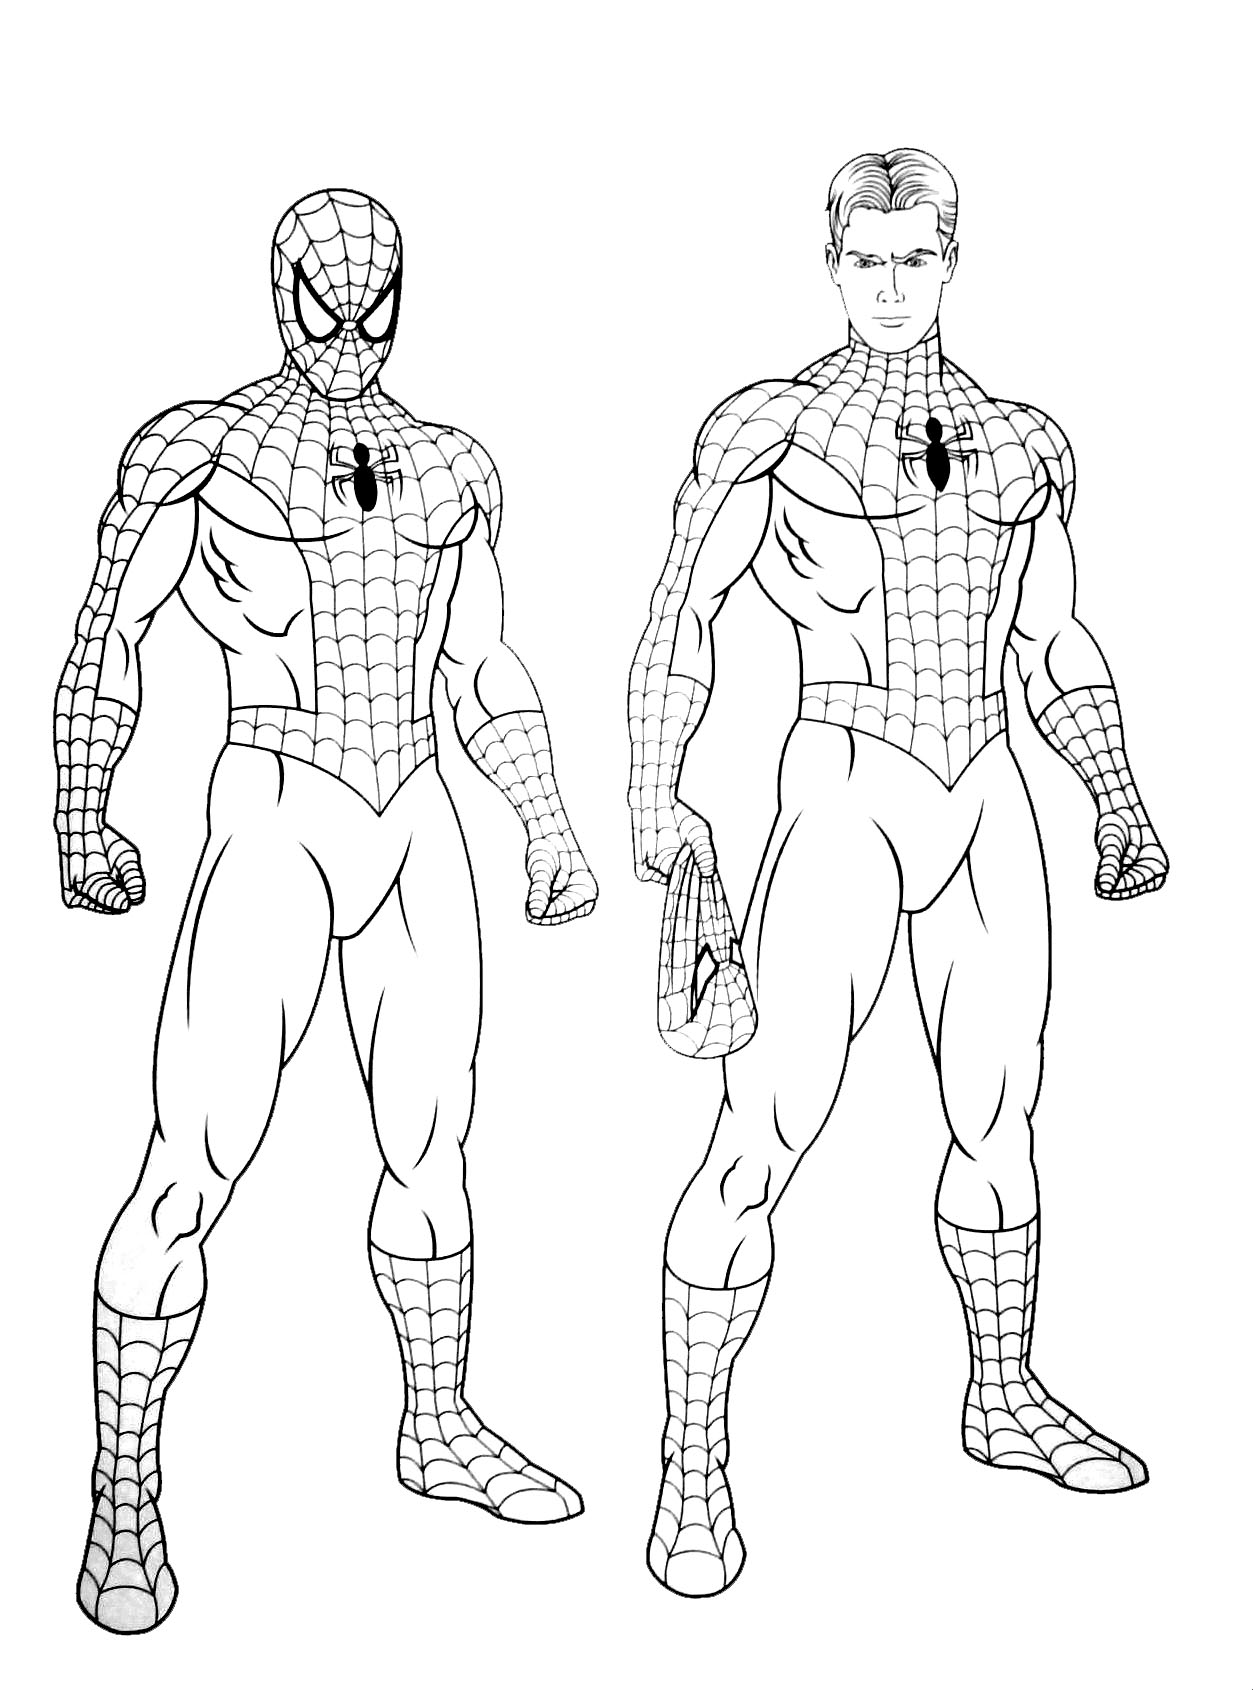 green goblin vs spiderman coloring pages